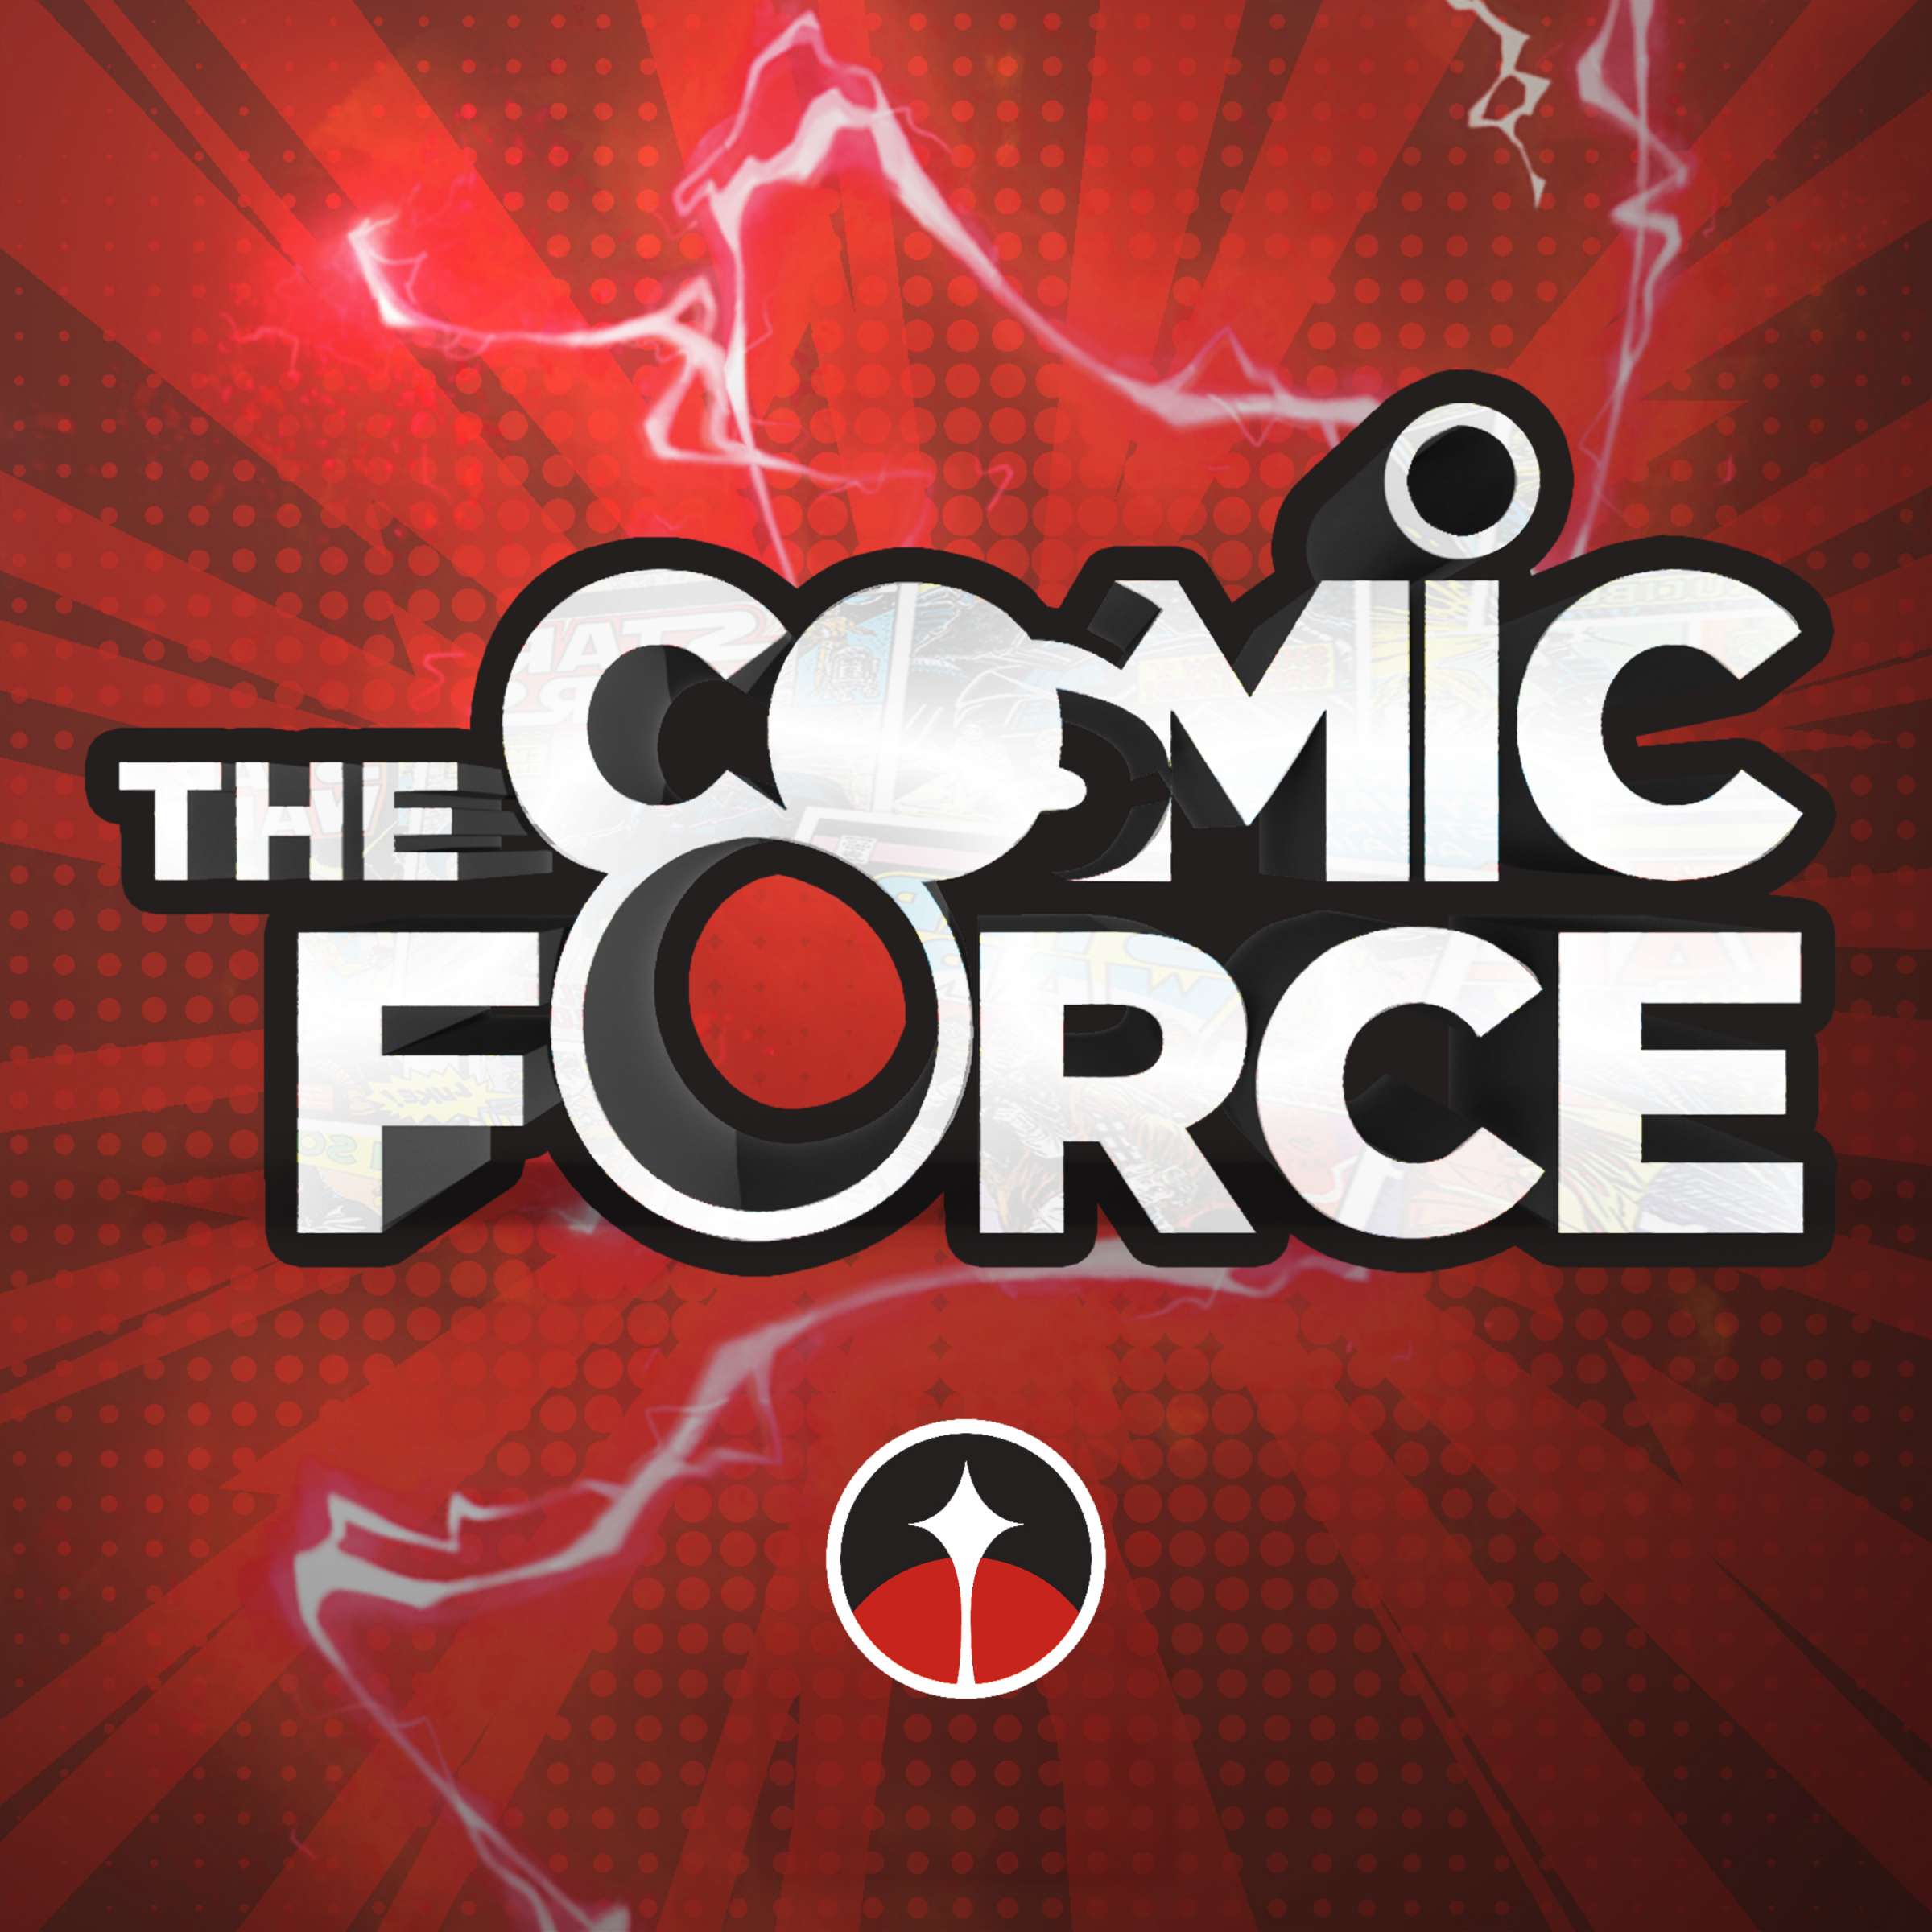 Artwork for The Cosmic Force